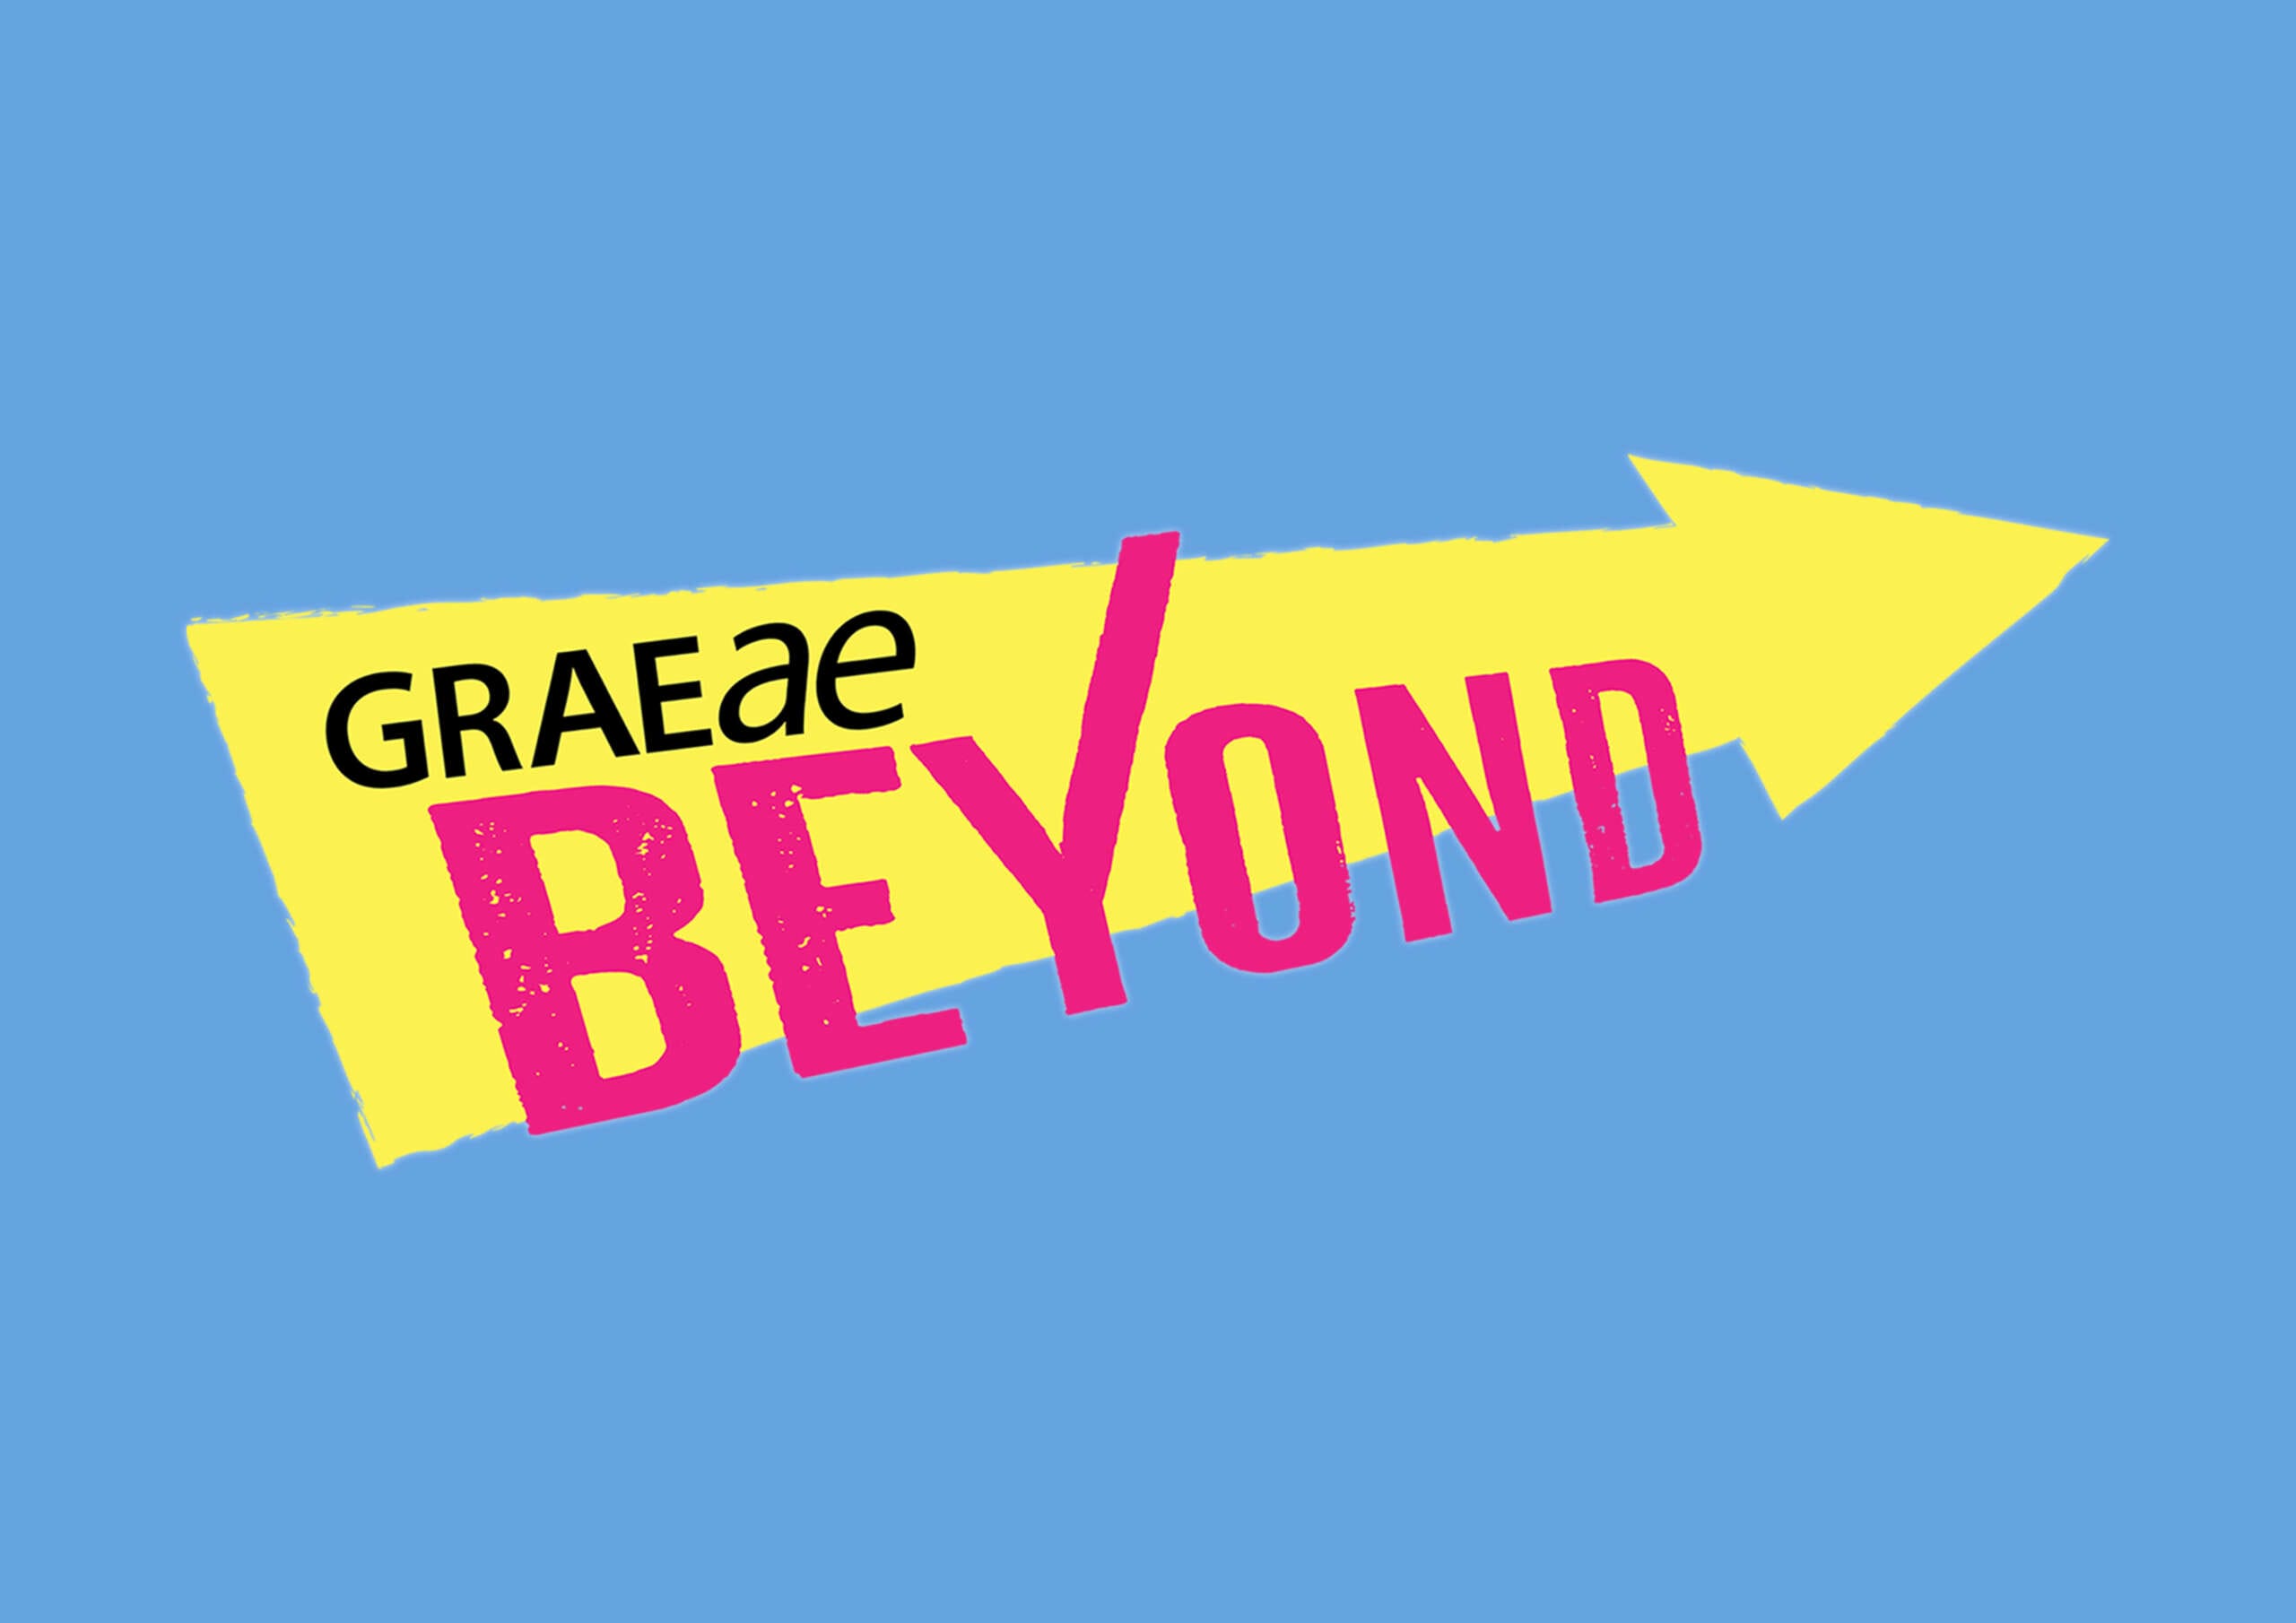 Graeae Beyond logo - black and pink text, and a yellow arrow, set on a blue background.